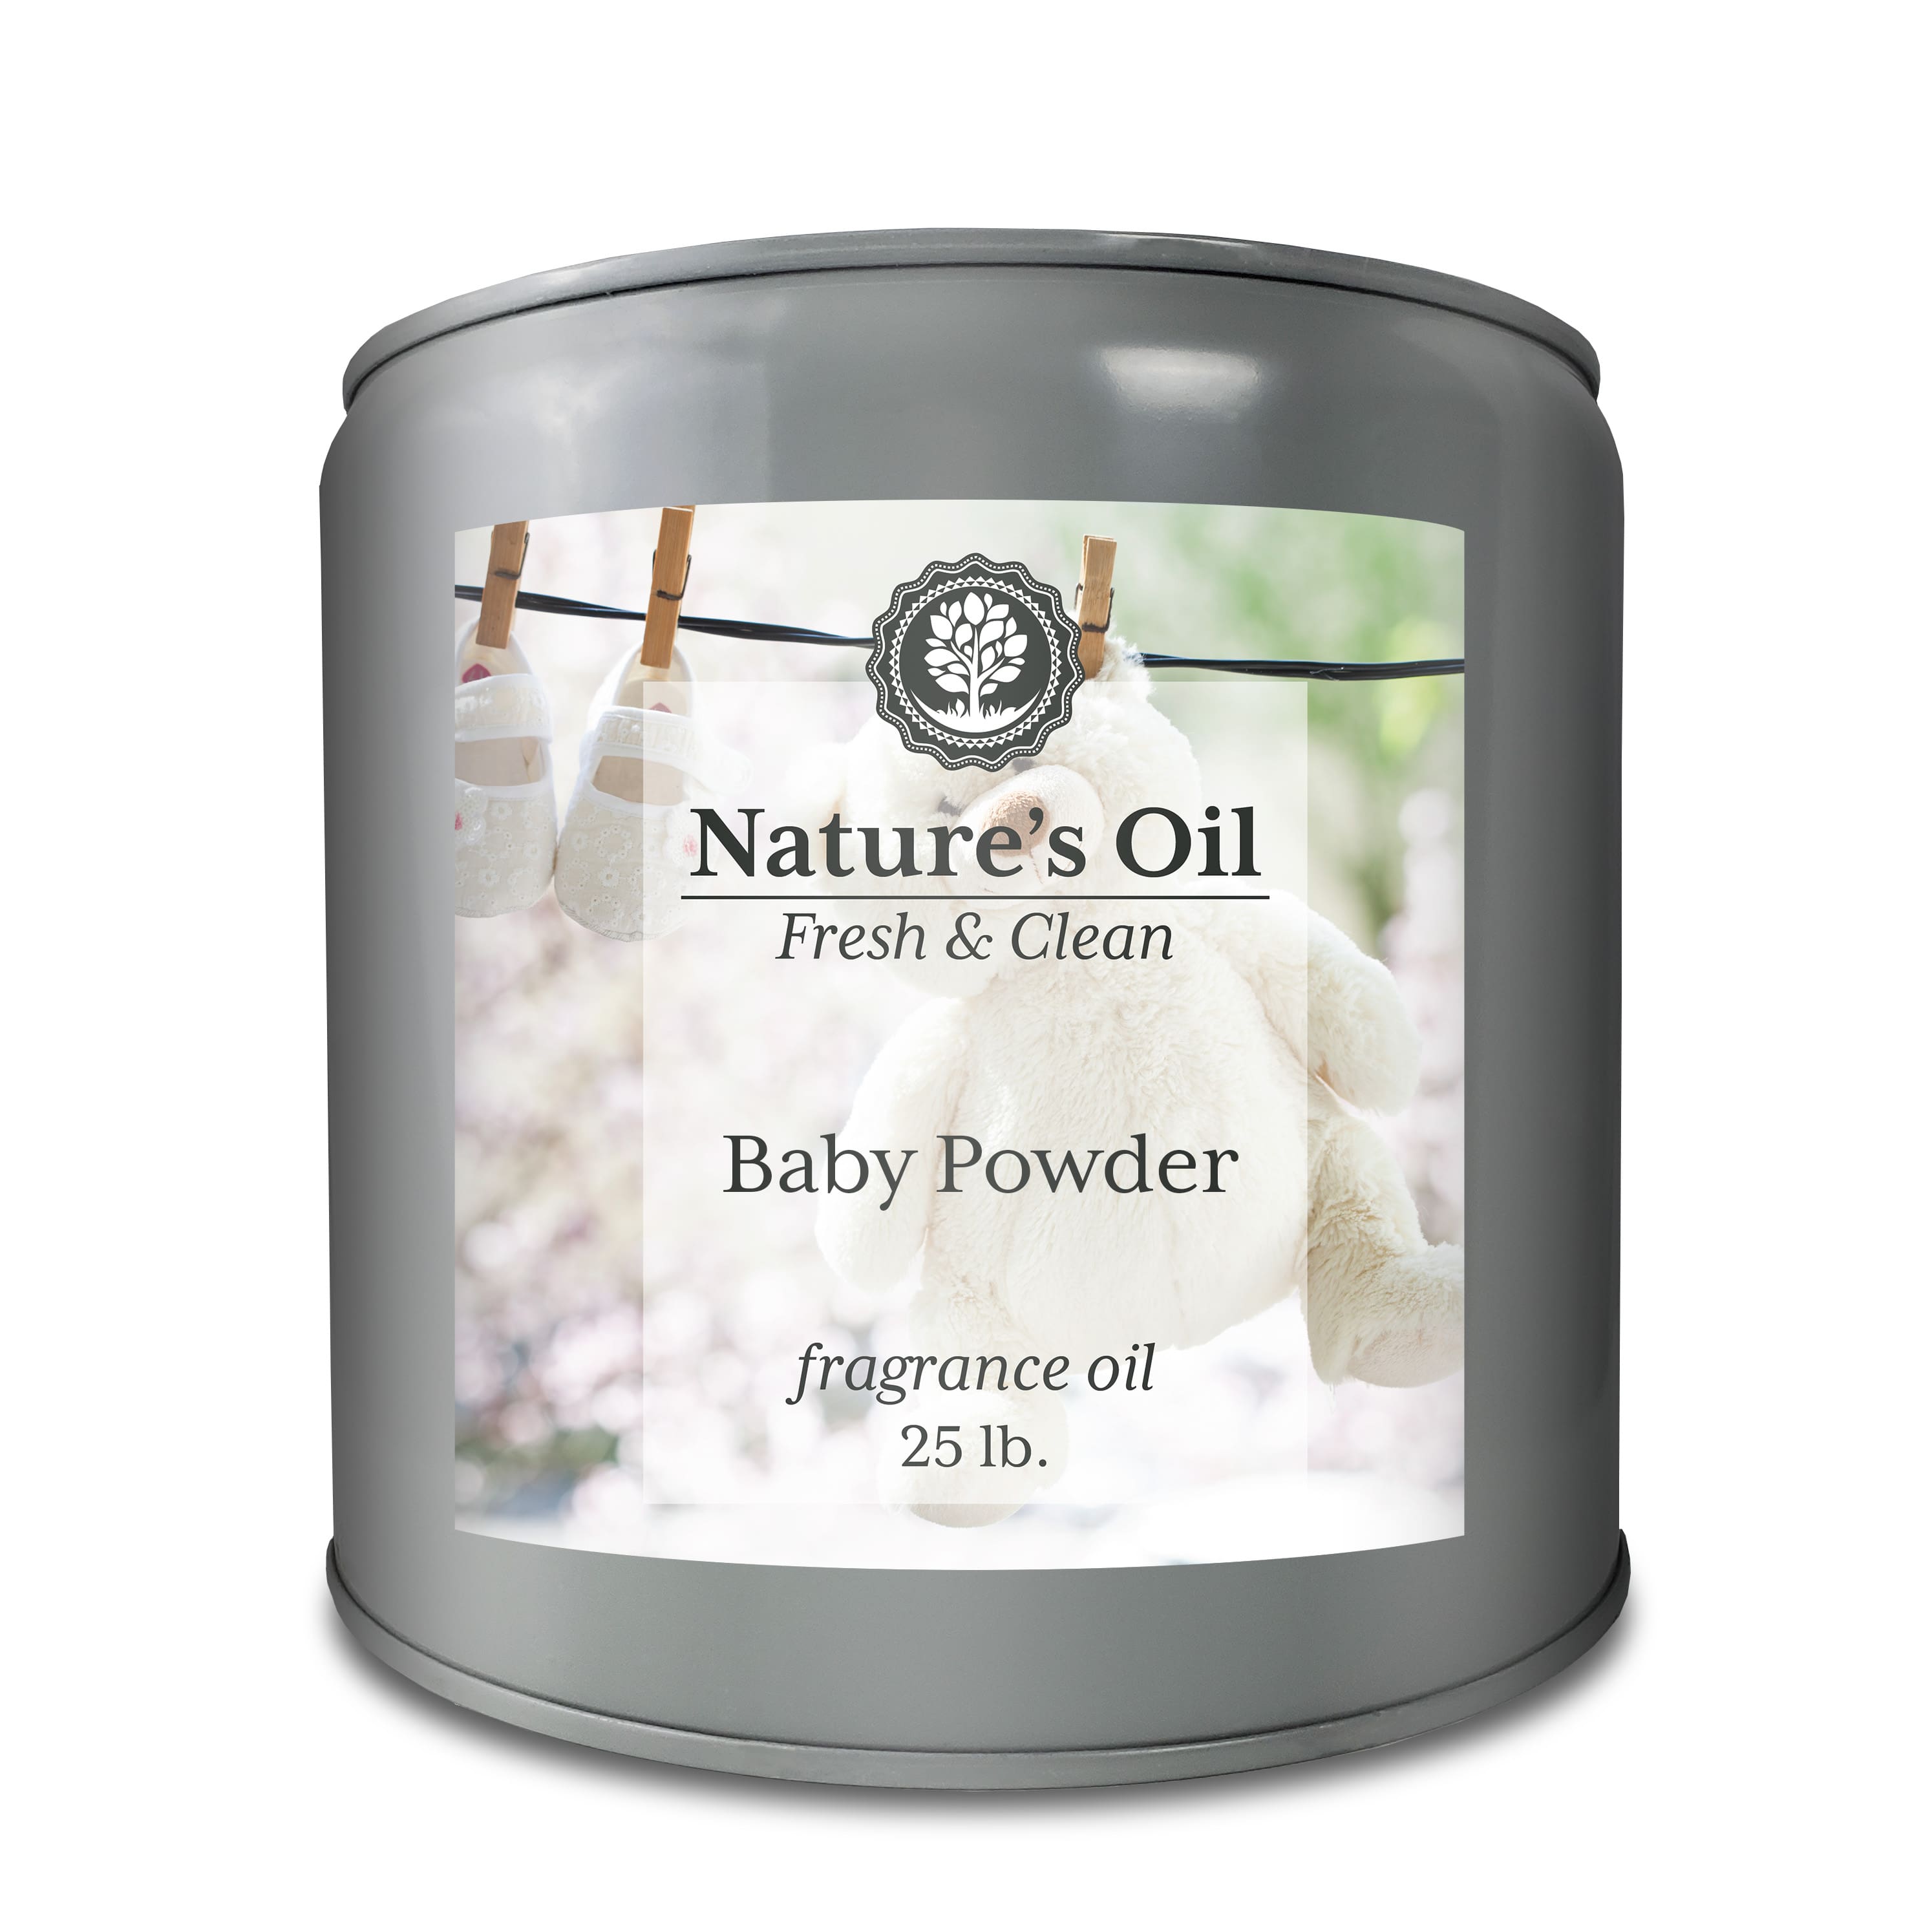 Baby Powder Fragrance Oil - Natural Sister's / Nature's Lab Store